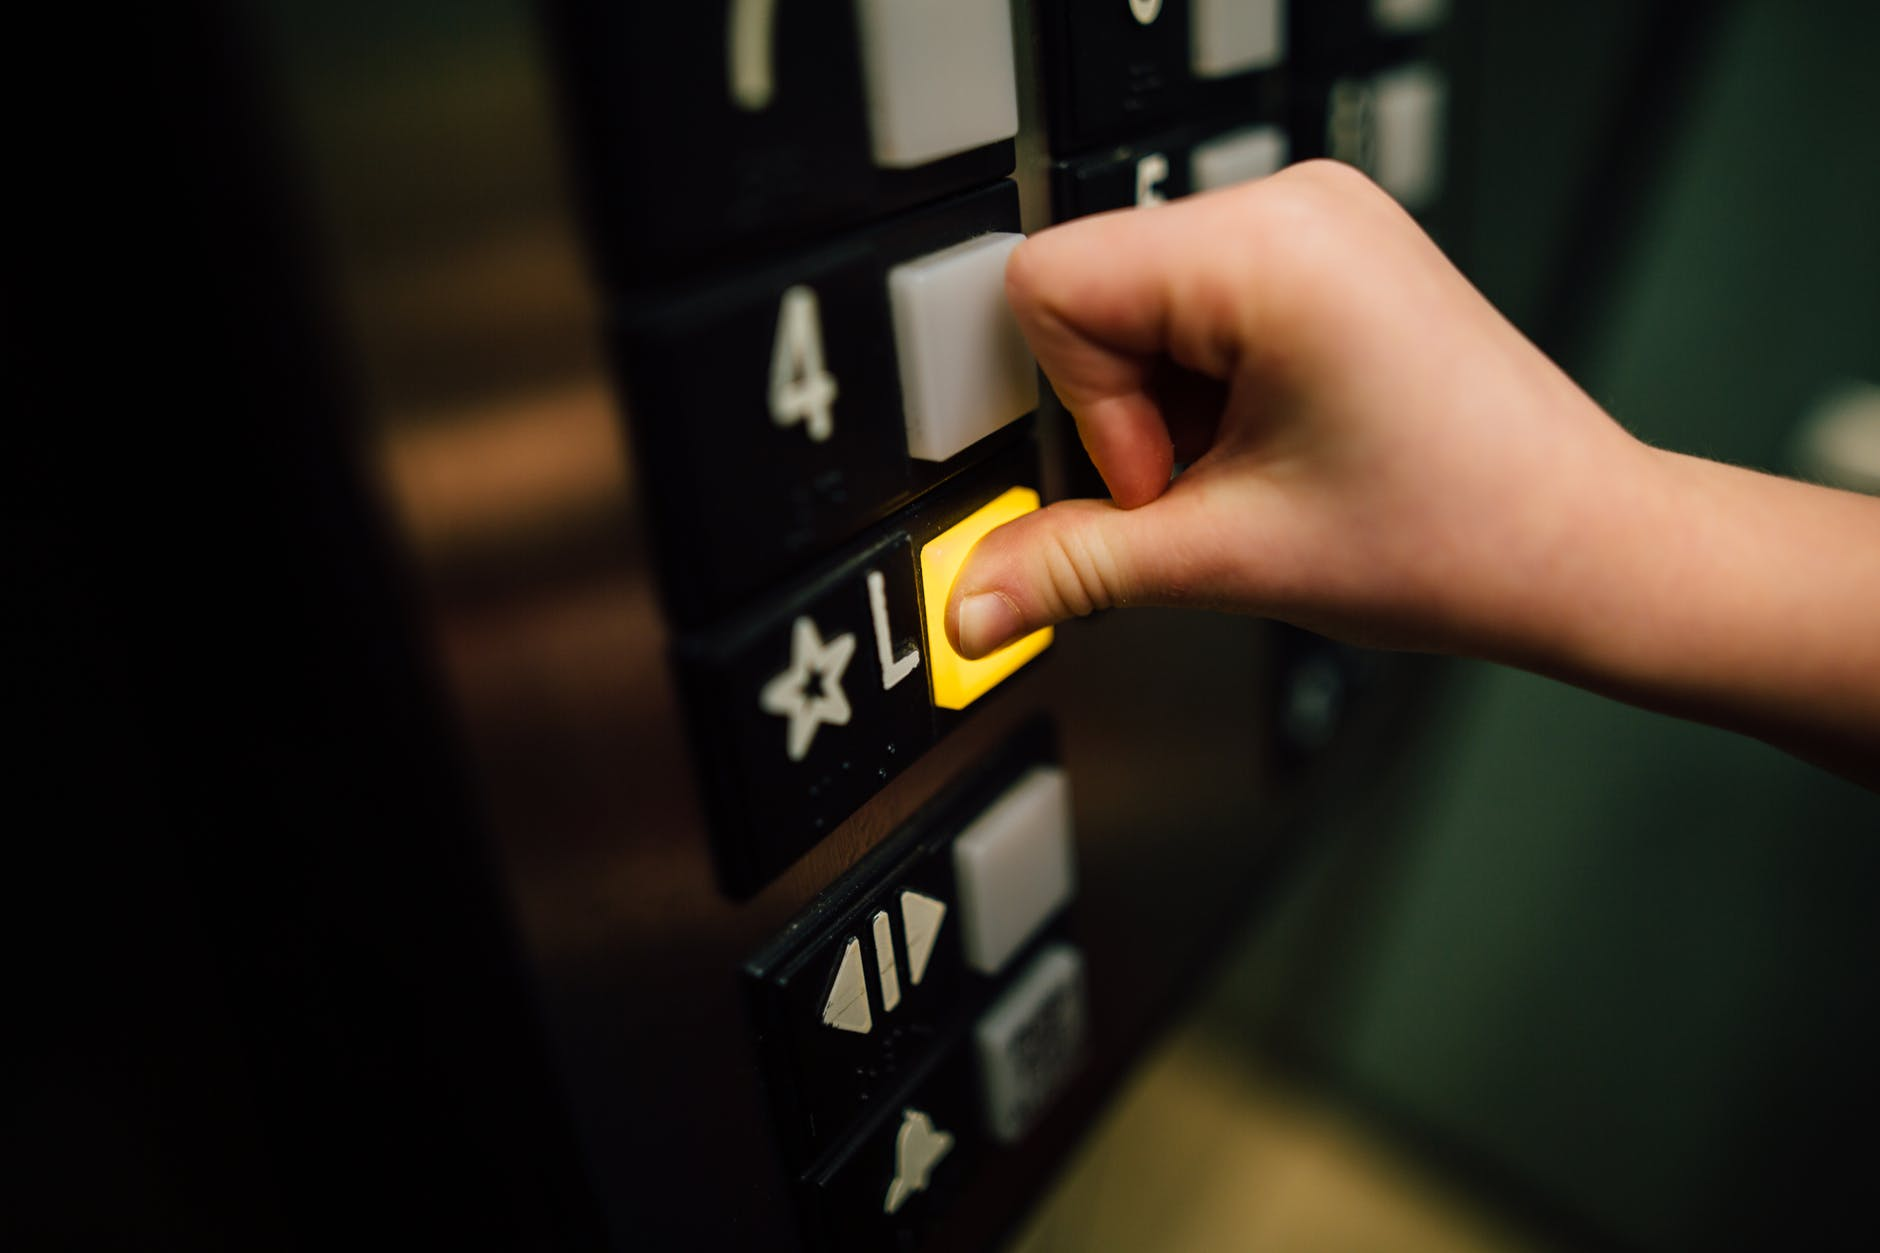 Pressing button in an elevator